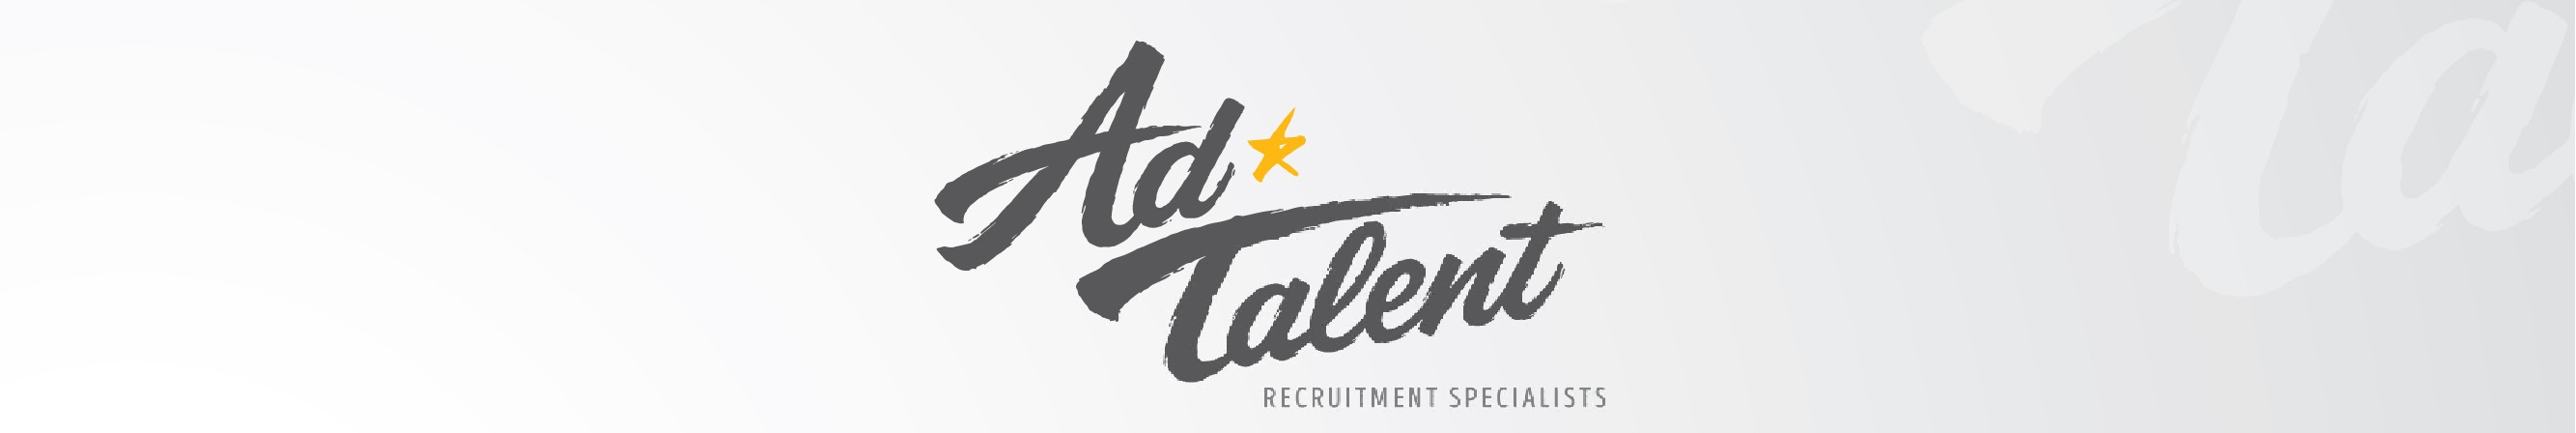 Ad Talent Africa background